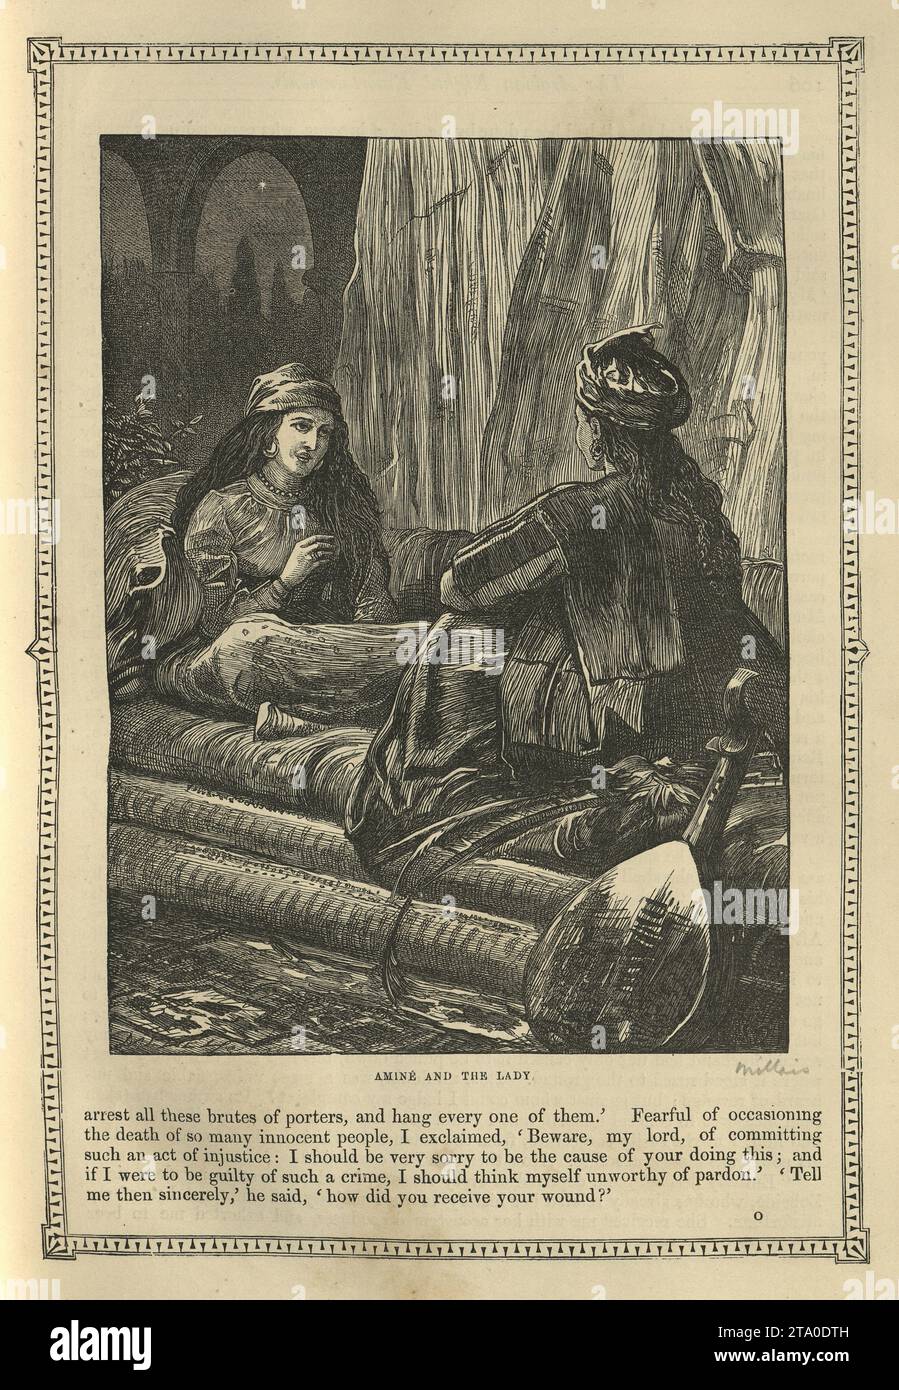 Vintage illustration One Thousand and One Nights, Amine and the Lady, Arabian, Middle Eastern folktales, by The Brothers Dalziel. Stock Photo